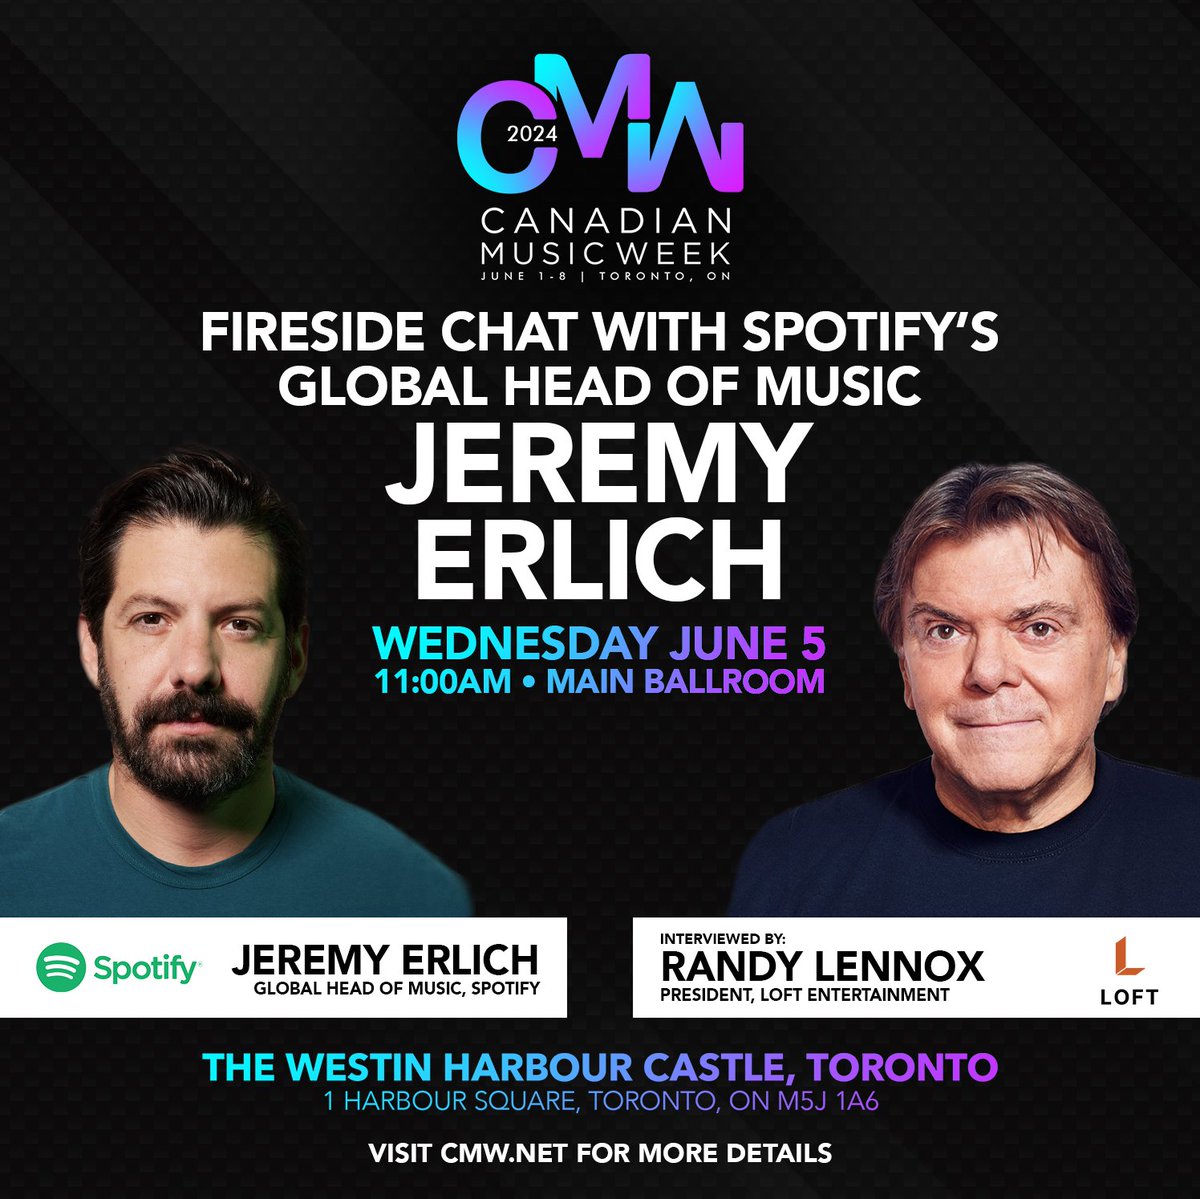 Join us for a Fireside Chat featuring Jeremy Erlich, Spotify’s Global Head of Music, at 11am on June 5th at the Westin Harbour Castle. Led by industry luminary Randy Lennox. Register for CMW today! bit.ly/4cZwpAE #cmw2024 #canandianmusicweek #Spotify